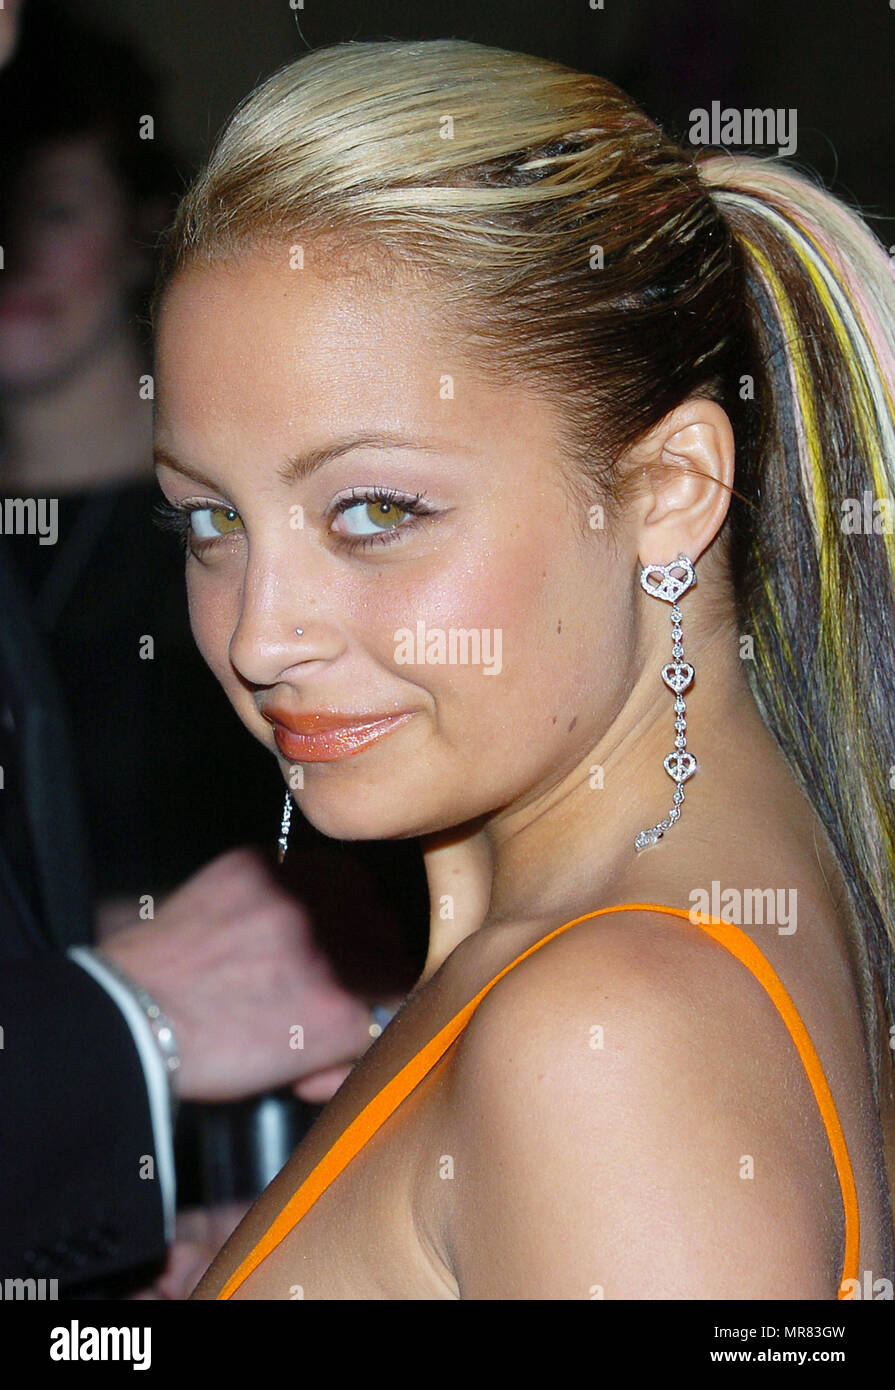 Nicole Richie arriving at the ACE Eddie Awards at the Beverly Hilton Hotel in Los Angeles. February 15, 2004.RichieNicole050 Red Carpet Event, Vertical, USA, Film Industry, Celebrities,  Photography, Bestof, Arts Culture and Entertainment, Topix Celebrities fashion /  Vertical, Best of, Event in Hollywood Life - California,  Red Carpet and backstage, USA, Film Industry, Celebrities,  movie celebrities, TV celebrities, Music celebrities, Photography, Bestof, Arts Culture and Entertainment,  Topix, headshot, vertical, one person,, from the year , 2003, inquiry tsuni@Gamma-USA.com Stock Photo